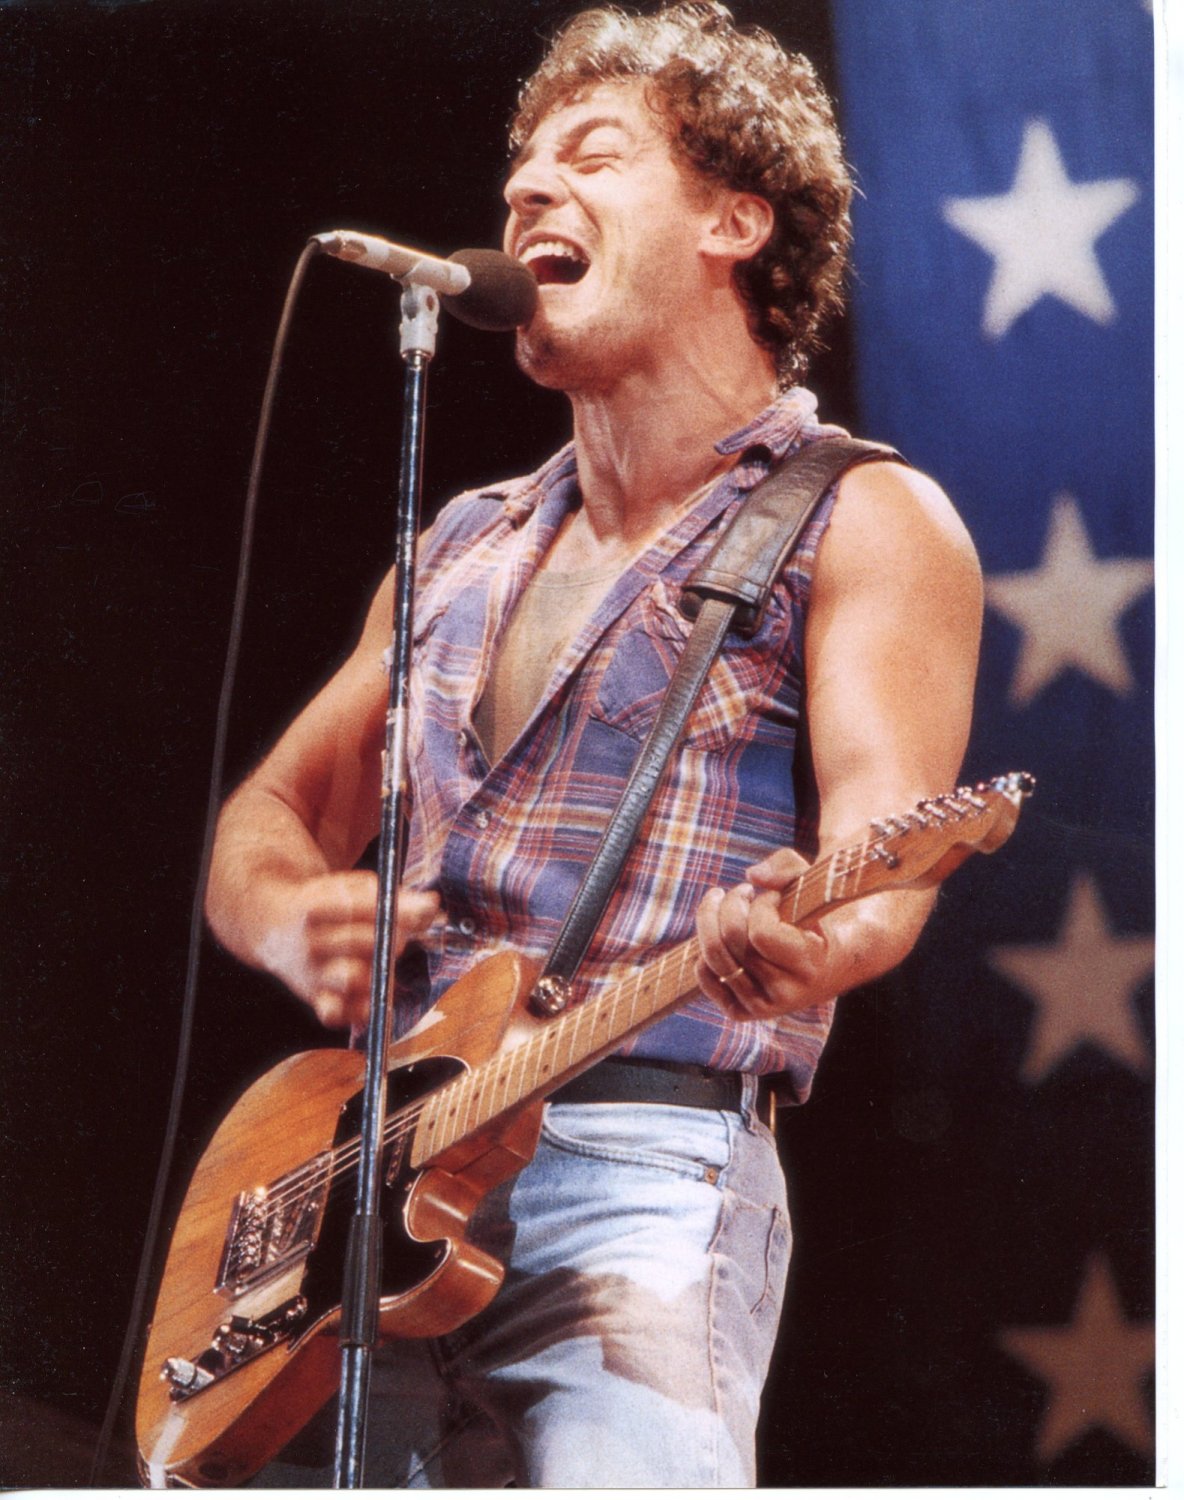 Bruce Springsteen 8x10 glossy photo #W8227